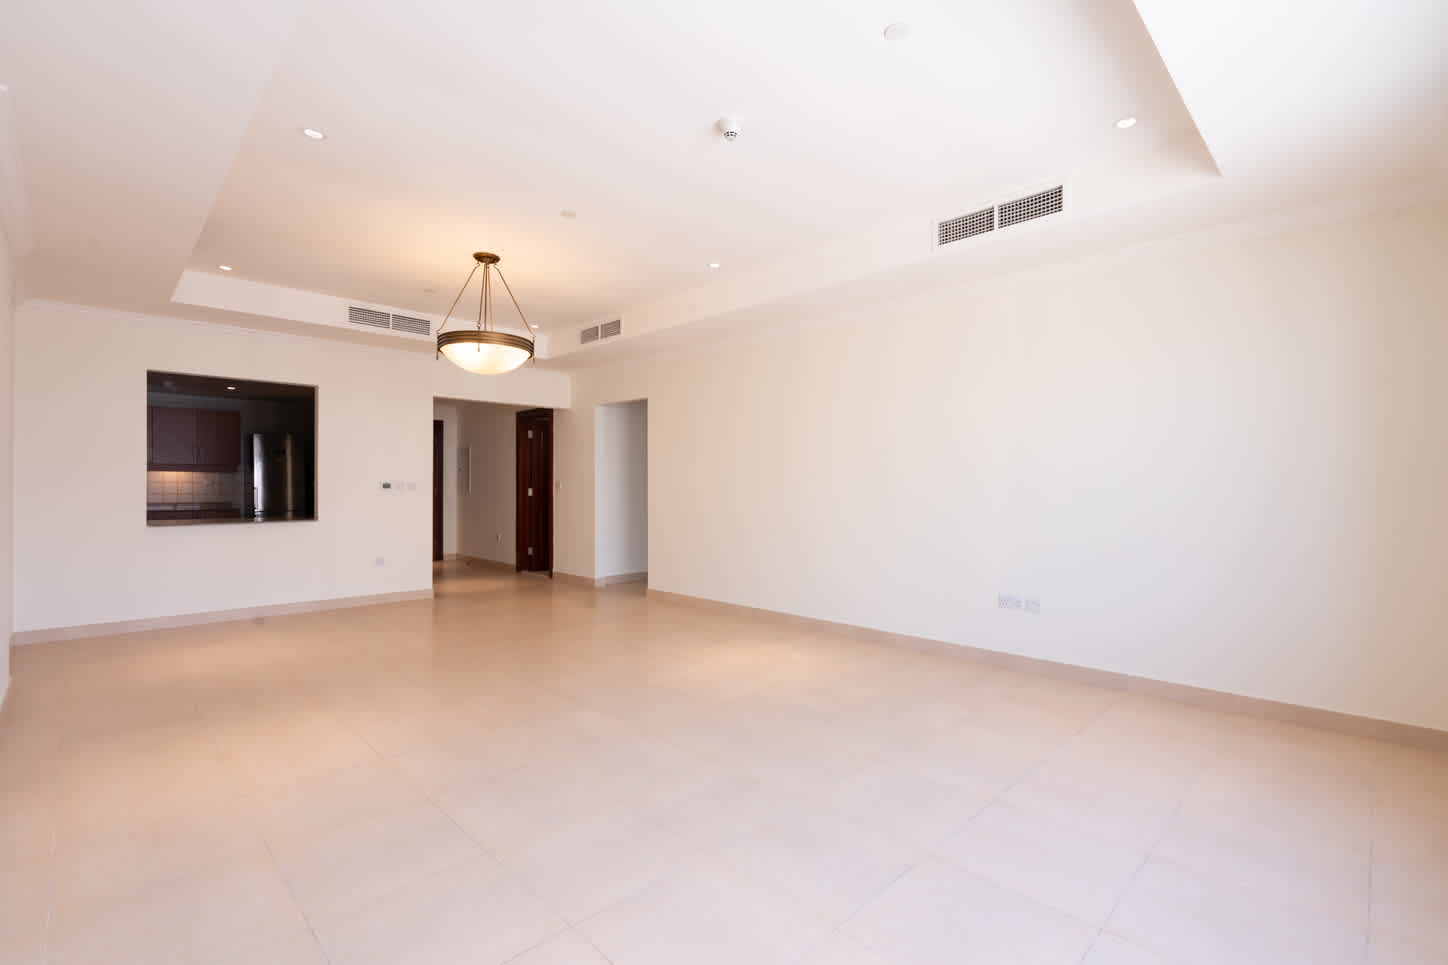 25 Spaces Real Estate - Porto Arabia - Properties for Rent - 16 March 2023 refWAPT258077 (9)